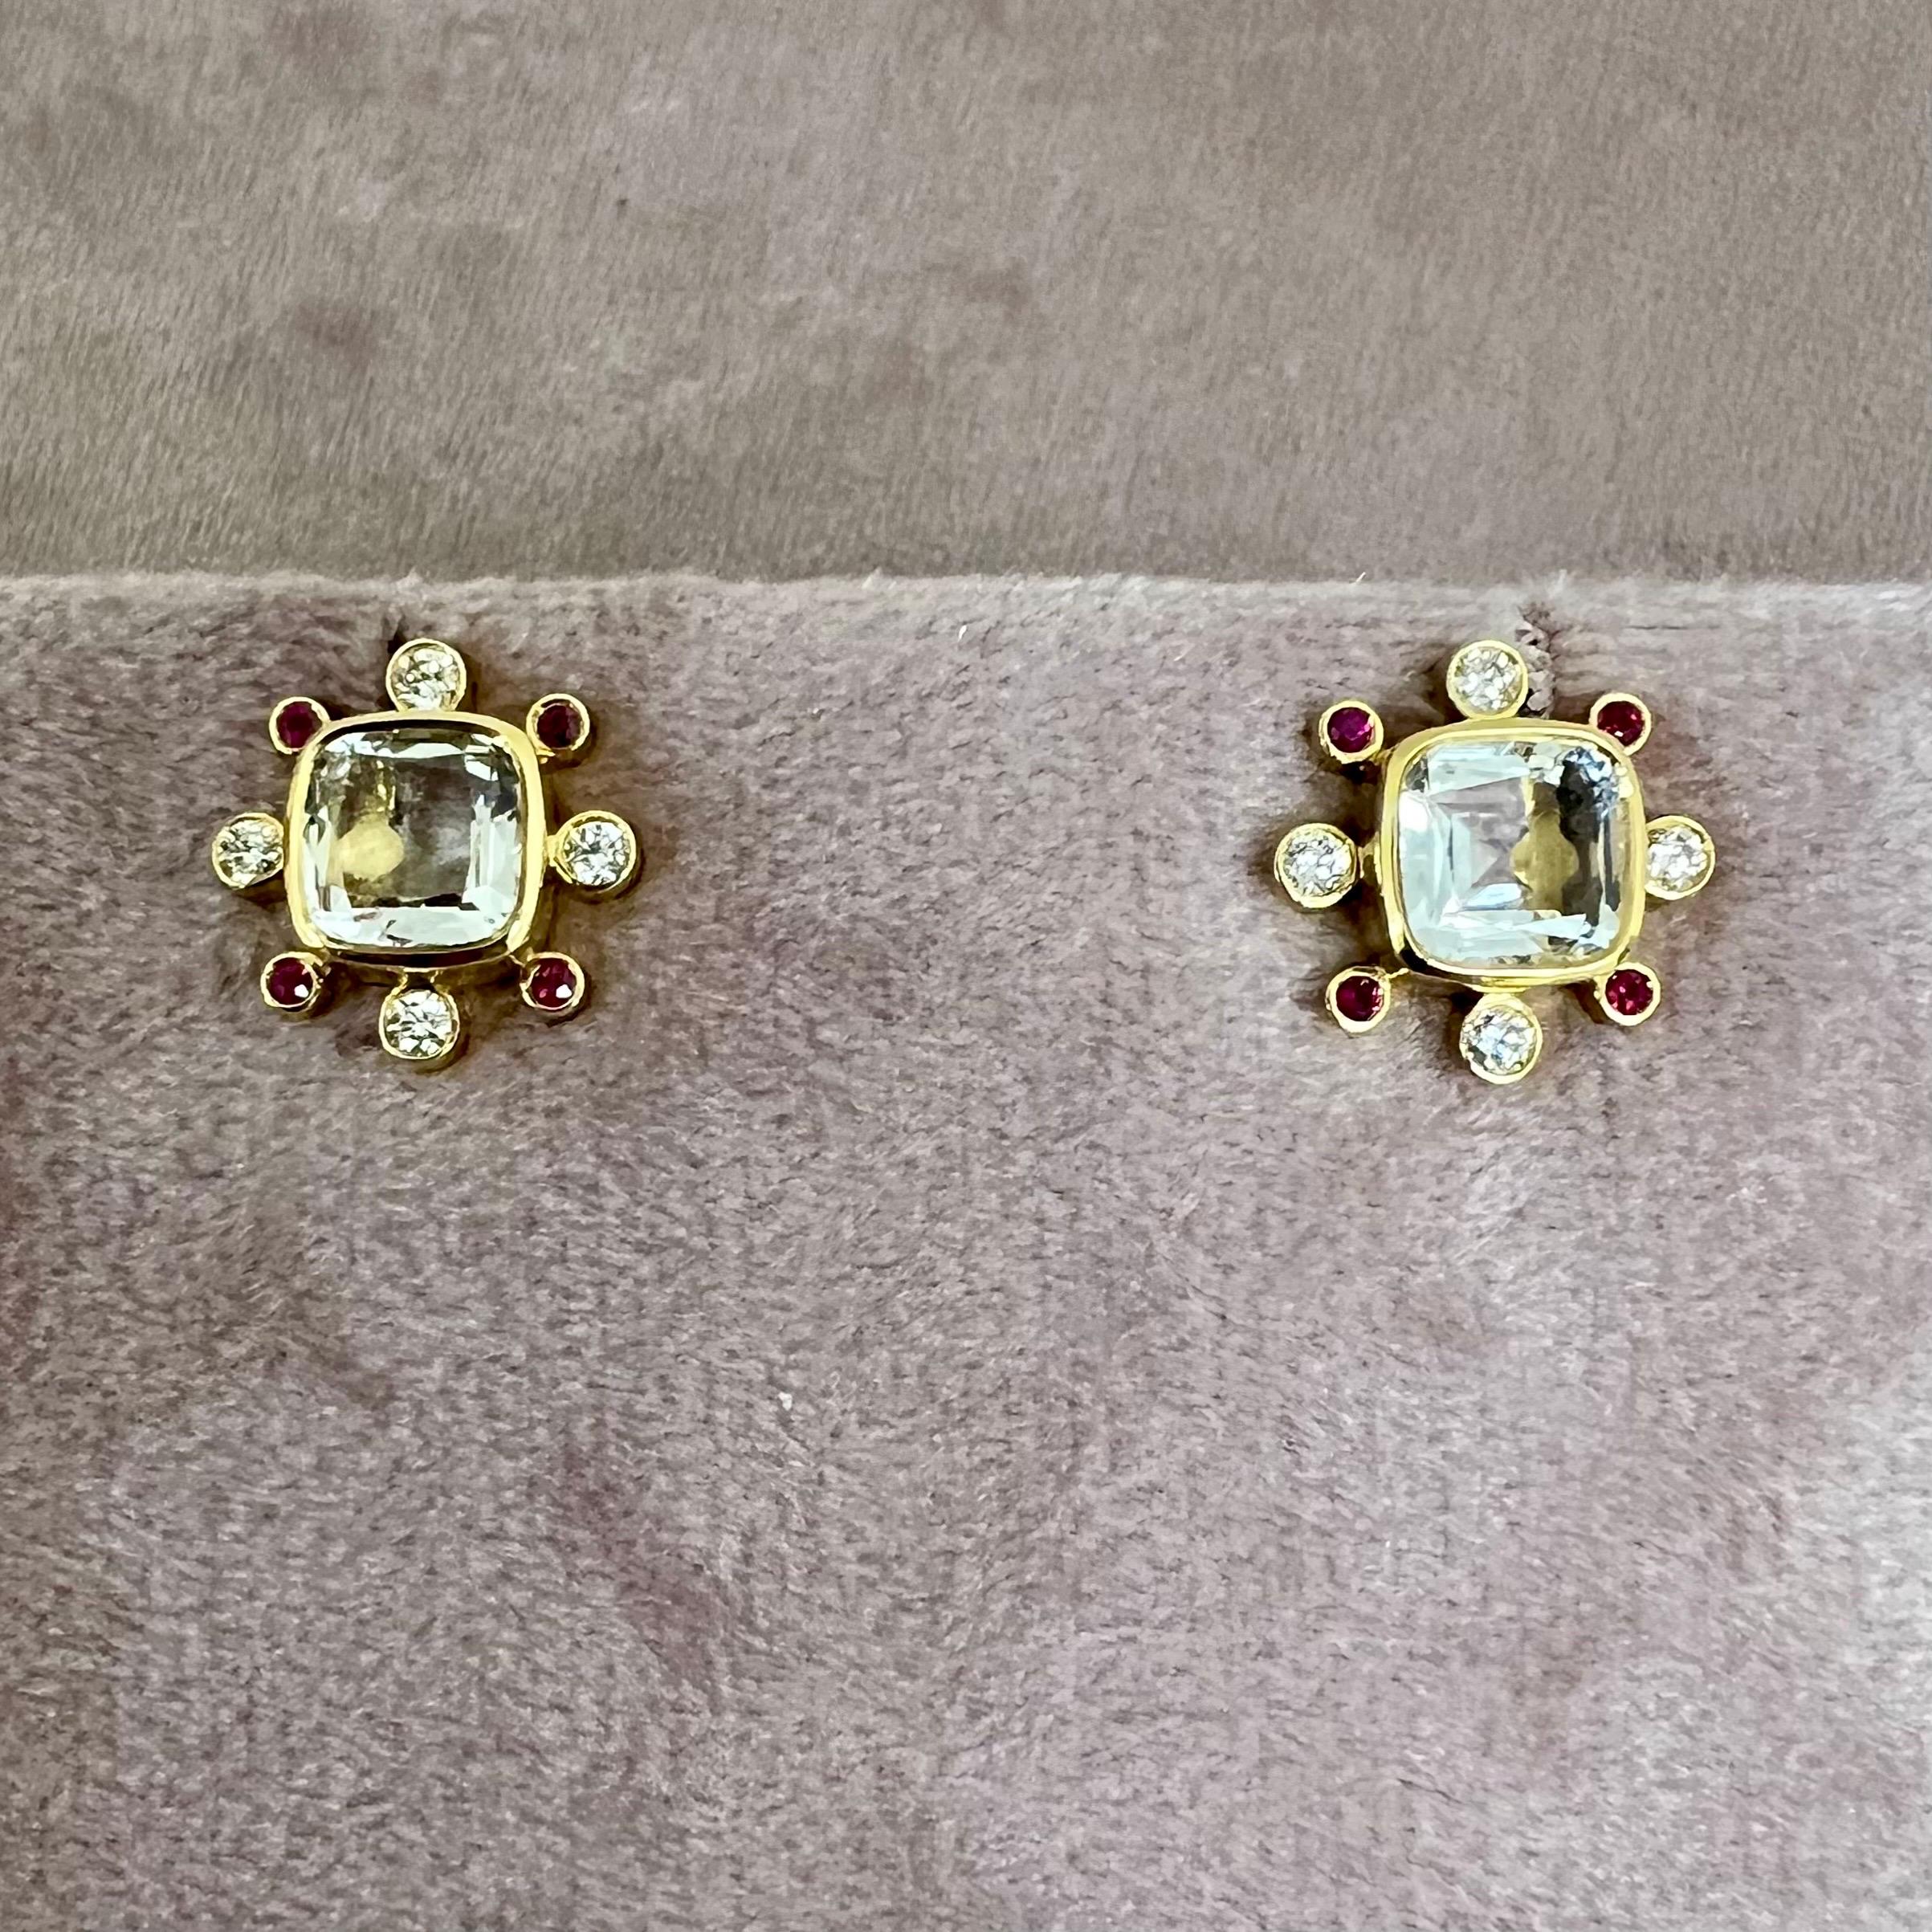 Created in 18 karat yellow gold
Rubies 0.10 carat approx.
Rock crystal 2.50 carats approx.
Diamonds 0.25 carat approx.
18kyg butterfly backs for pierced ears
Limited edition

Crafted from 18 karat yellow gold, these limited edition earrings boast